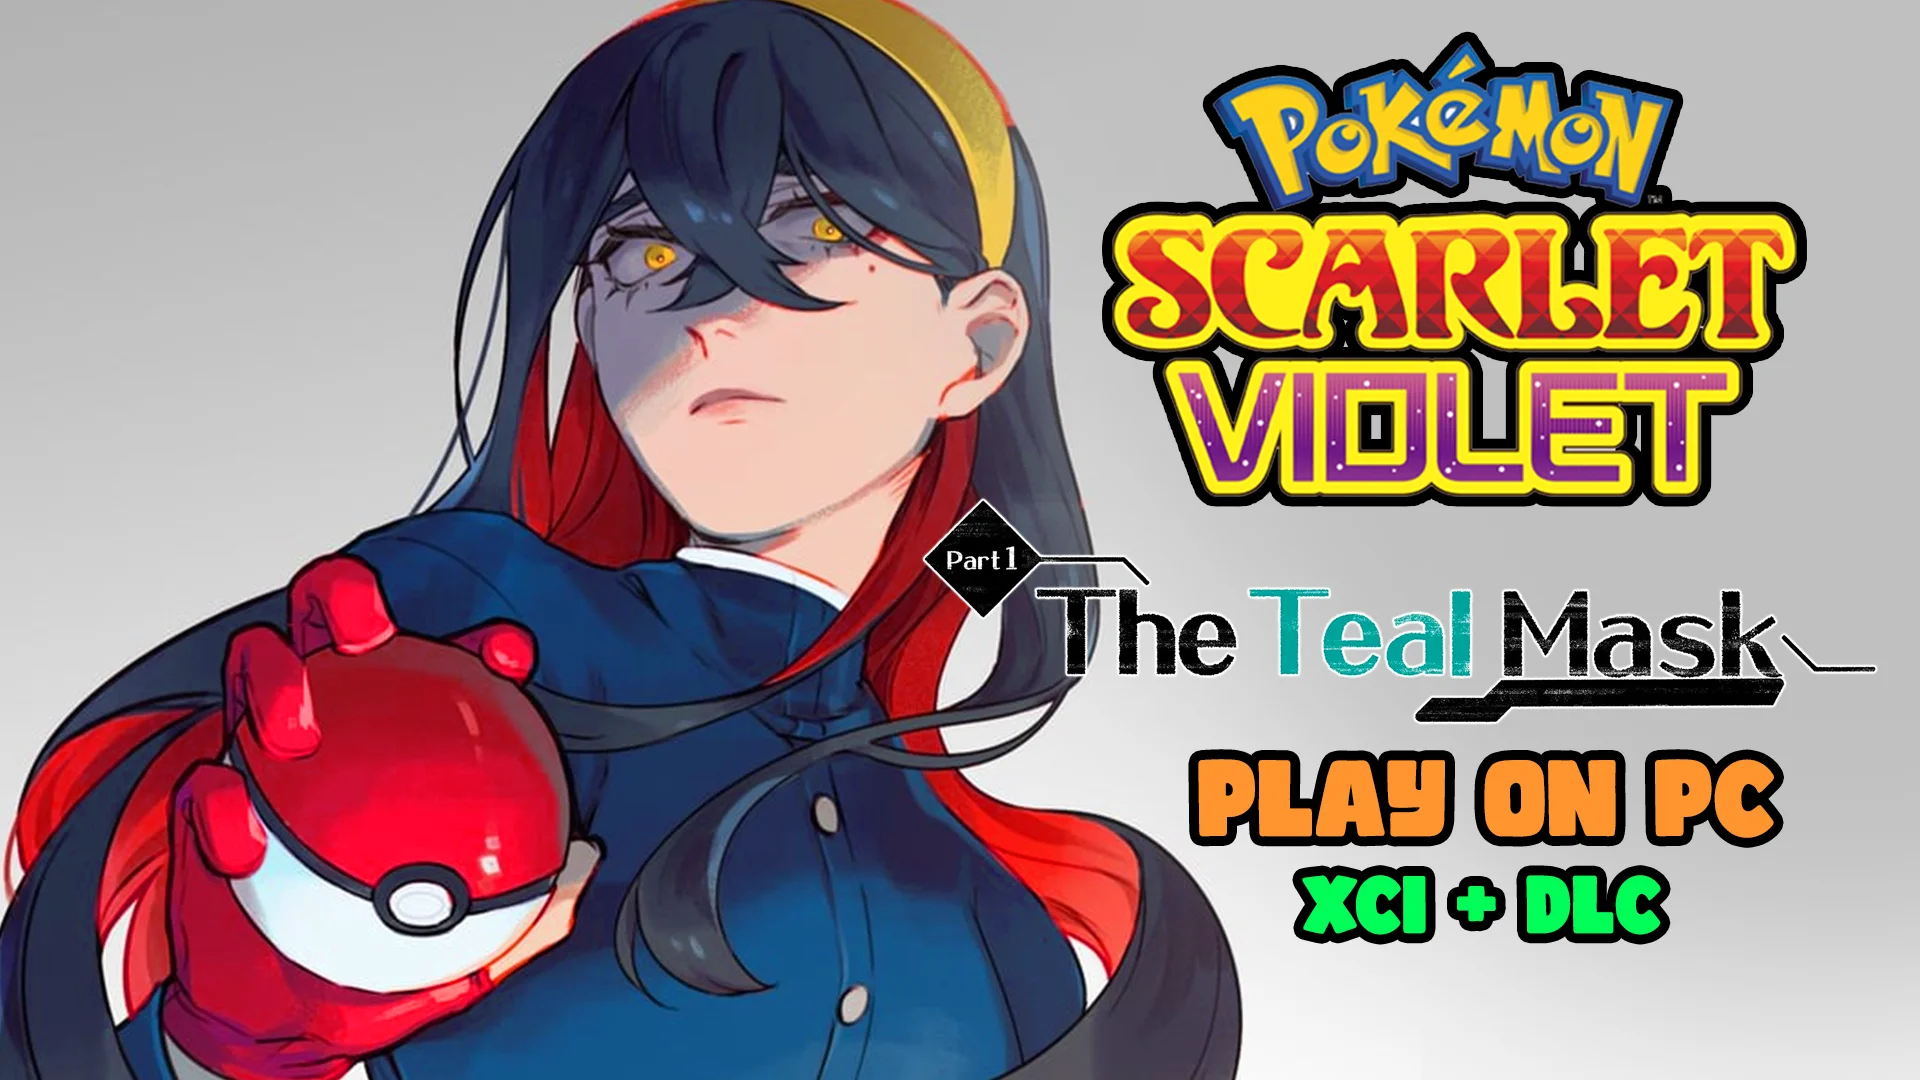 How to Play Pokémon Scarlet & Violet Part 1 DLC The Teal Mask On